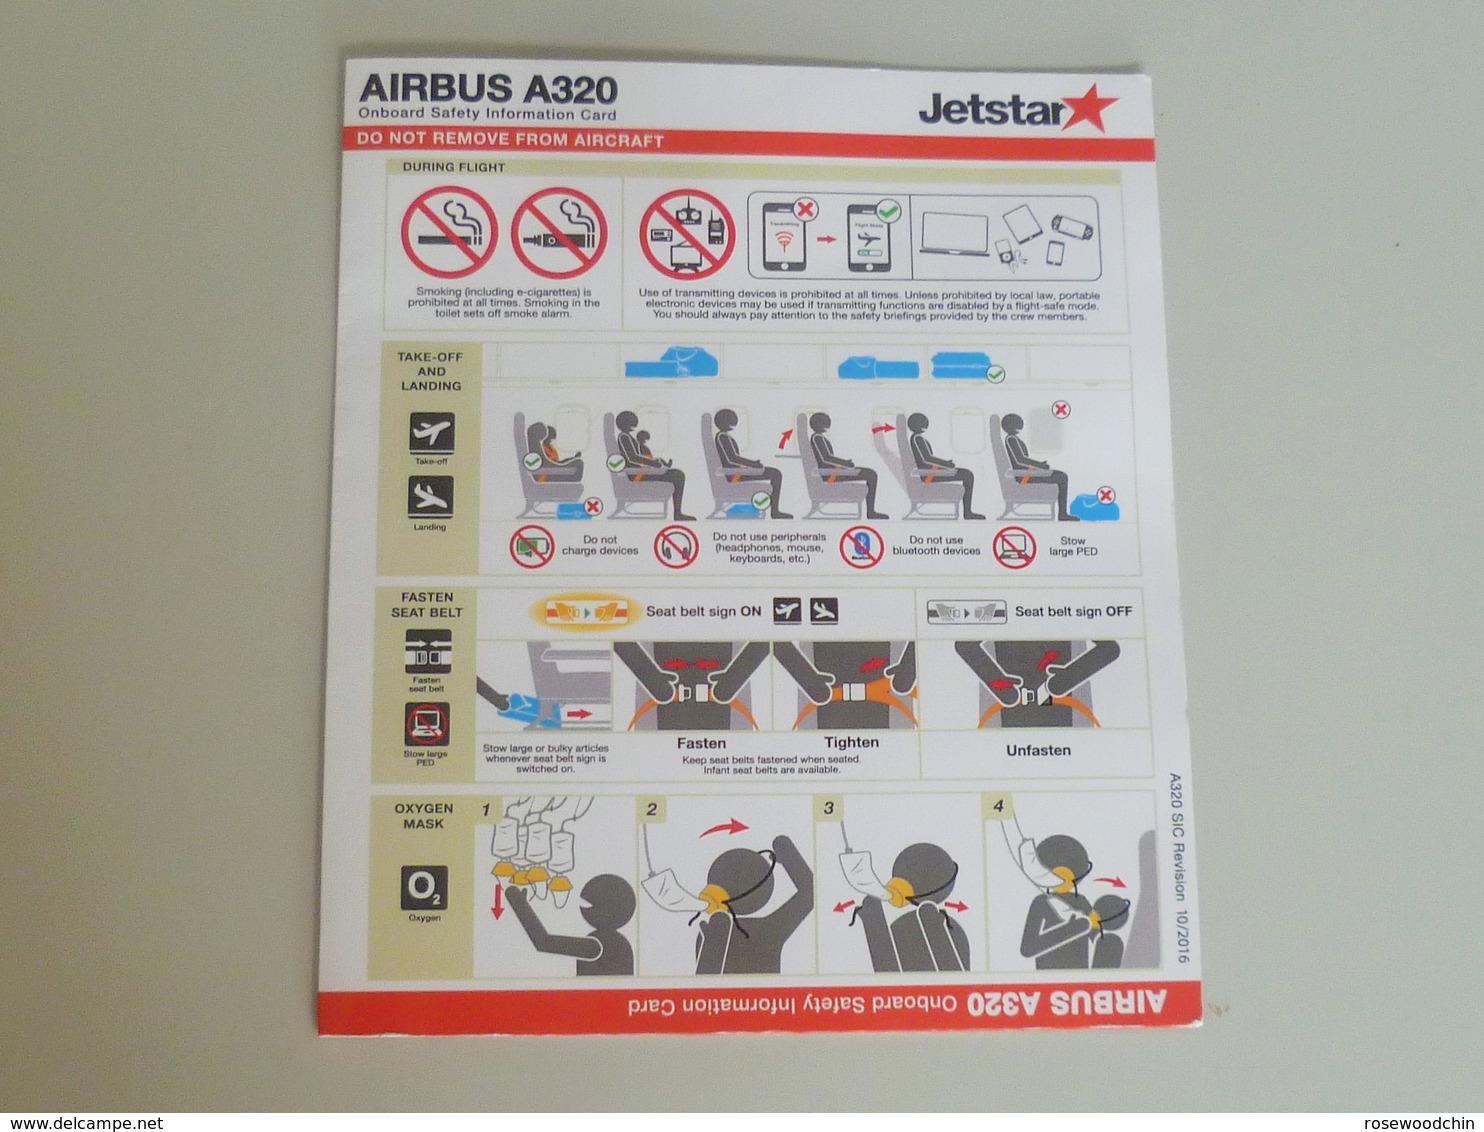 Airlines Jetstar A320 Airbus Onboard Safety Information Card (#3) - Fichas De Seguridad